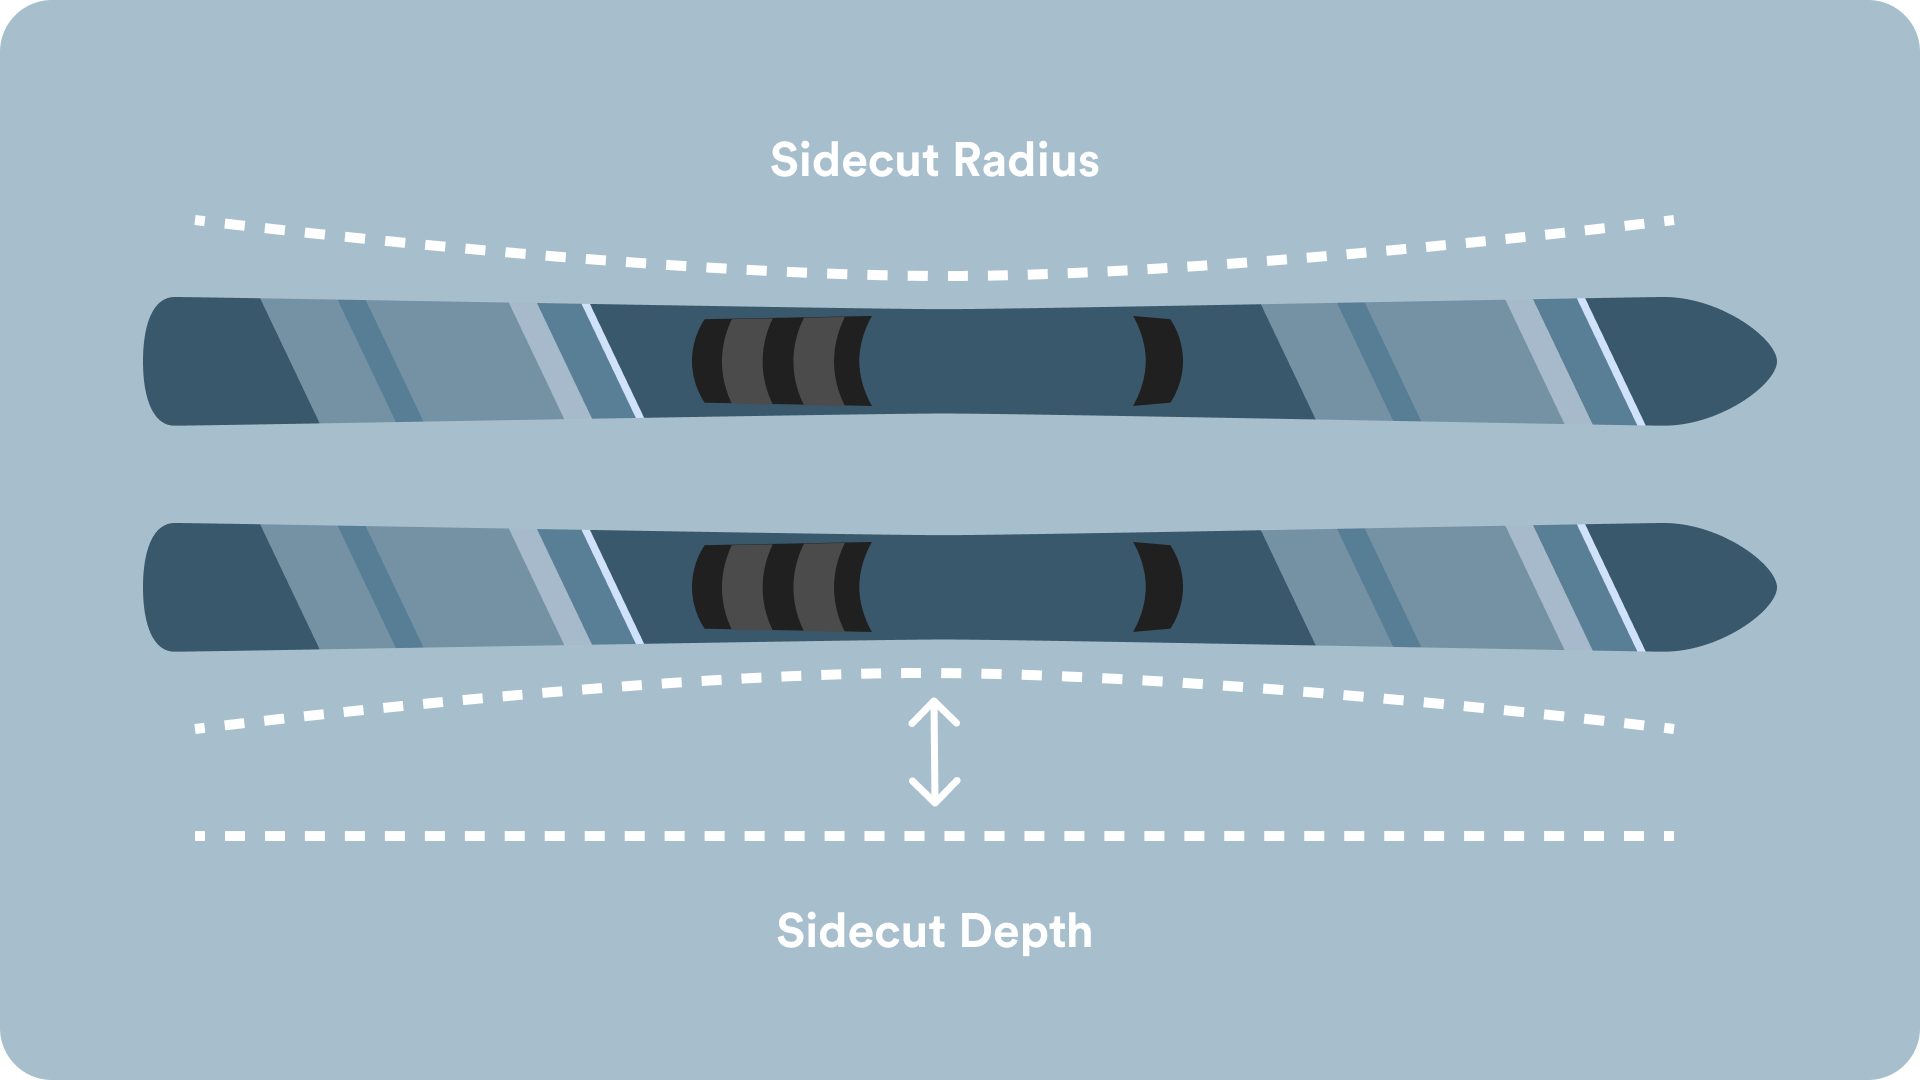 Sidecut Profile Diagram of skis showing where the sidecut radius and cut is. 